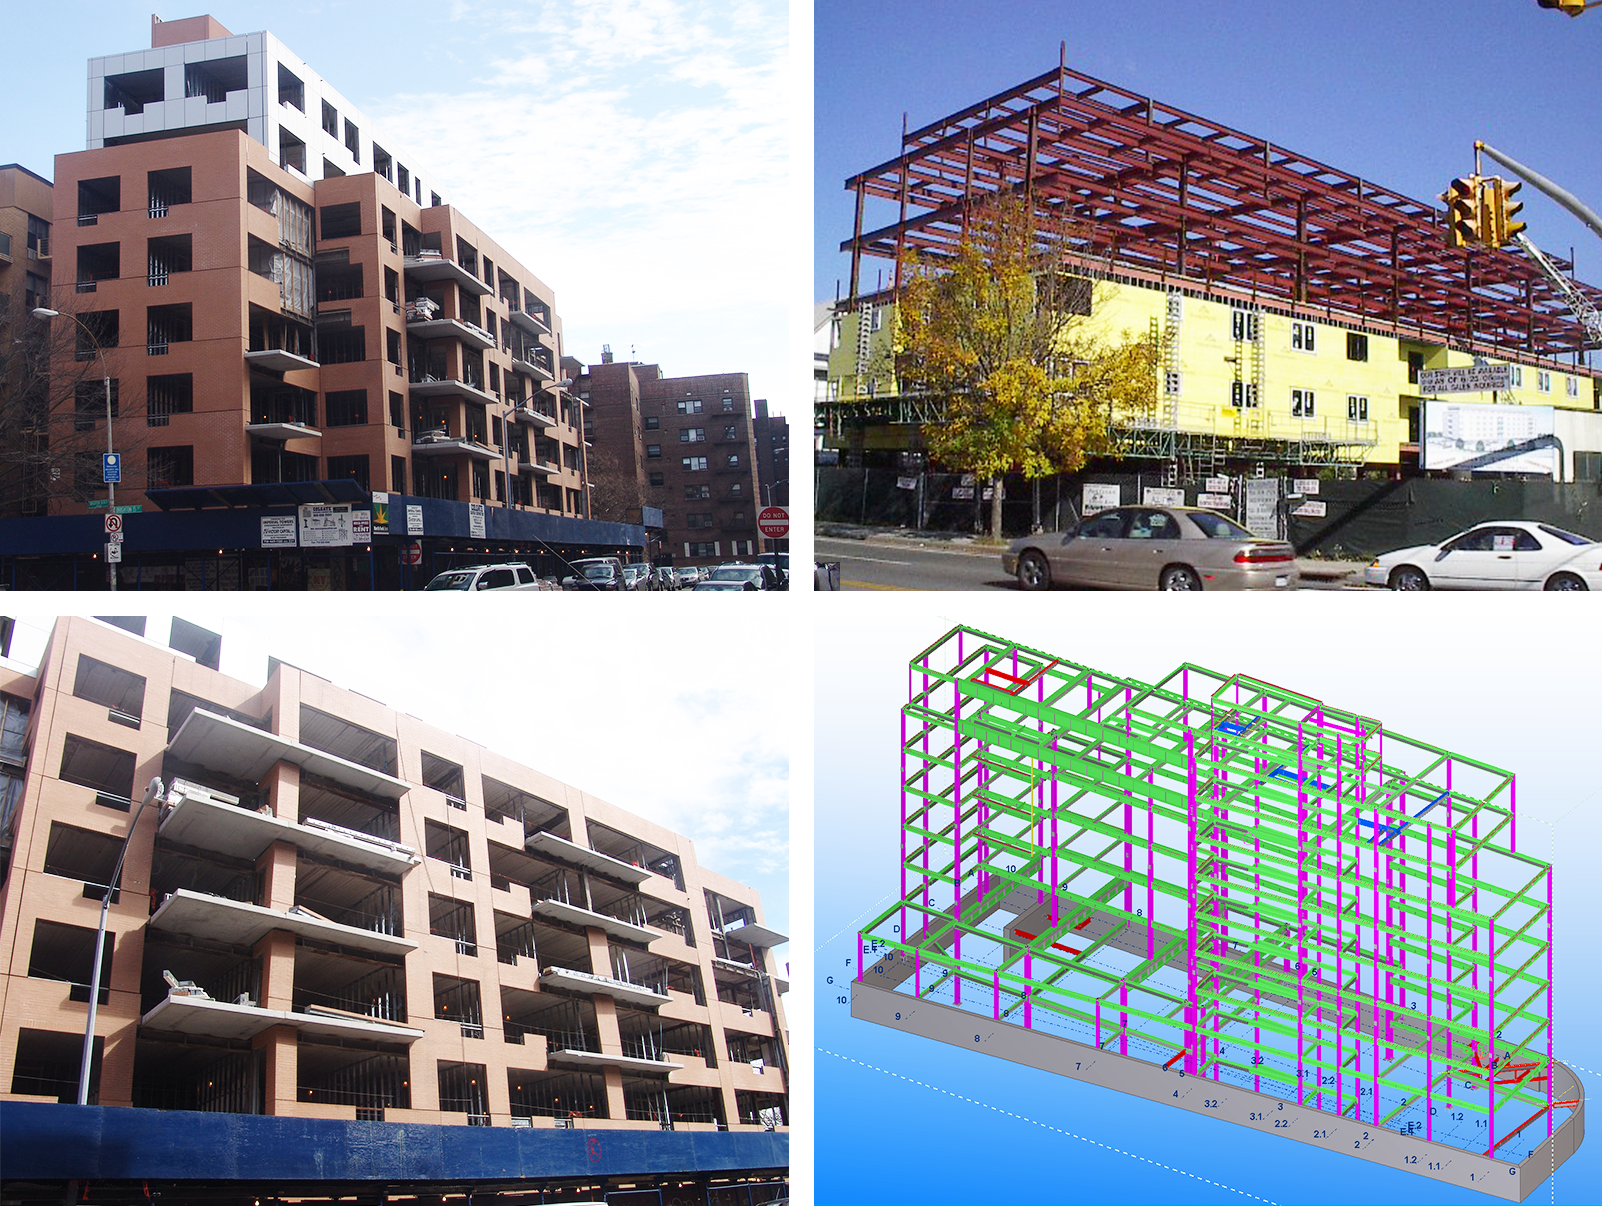   BRIGHTON BEACH APARTMENTS  Construction support services,&nbsp;preparation and approval of structural steel shop drawings, connection design, and special inspections of concrete foundation, cast-in-place concrete, concrete design mix, welding, high